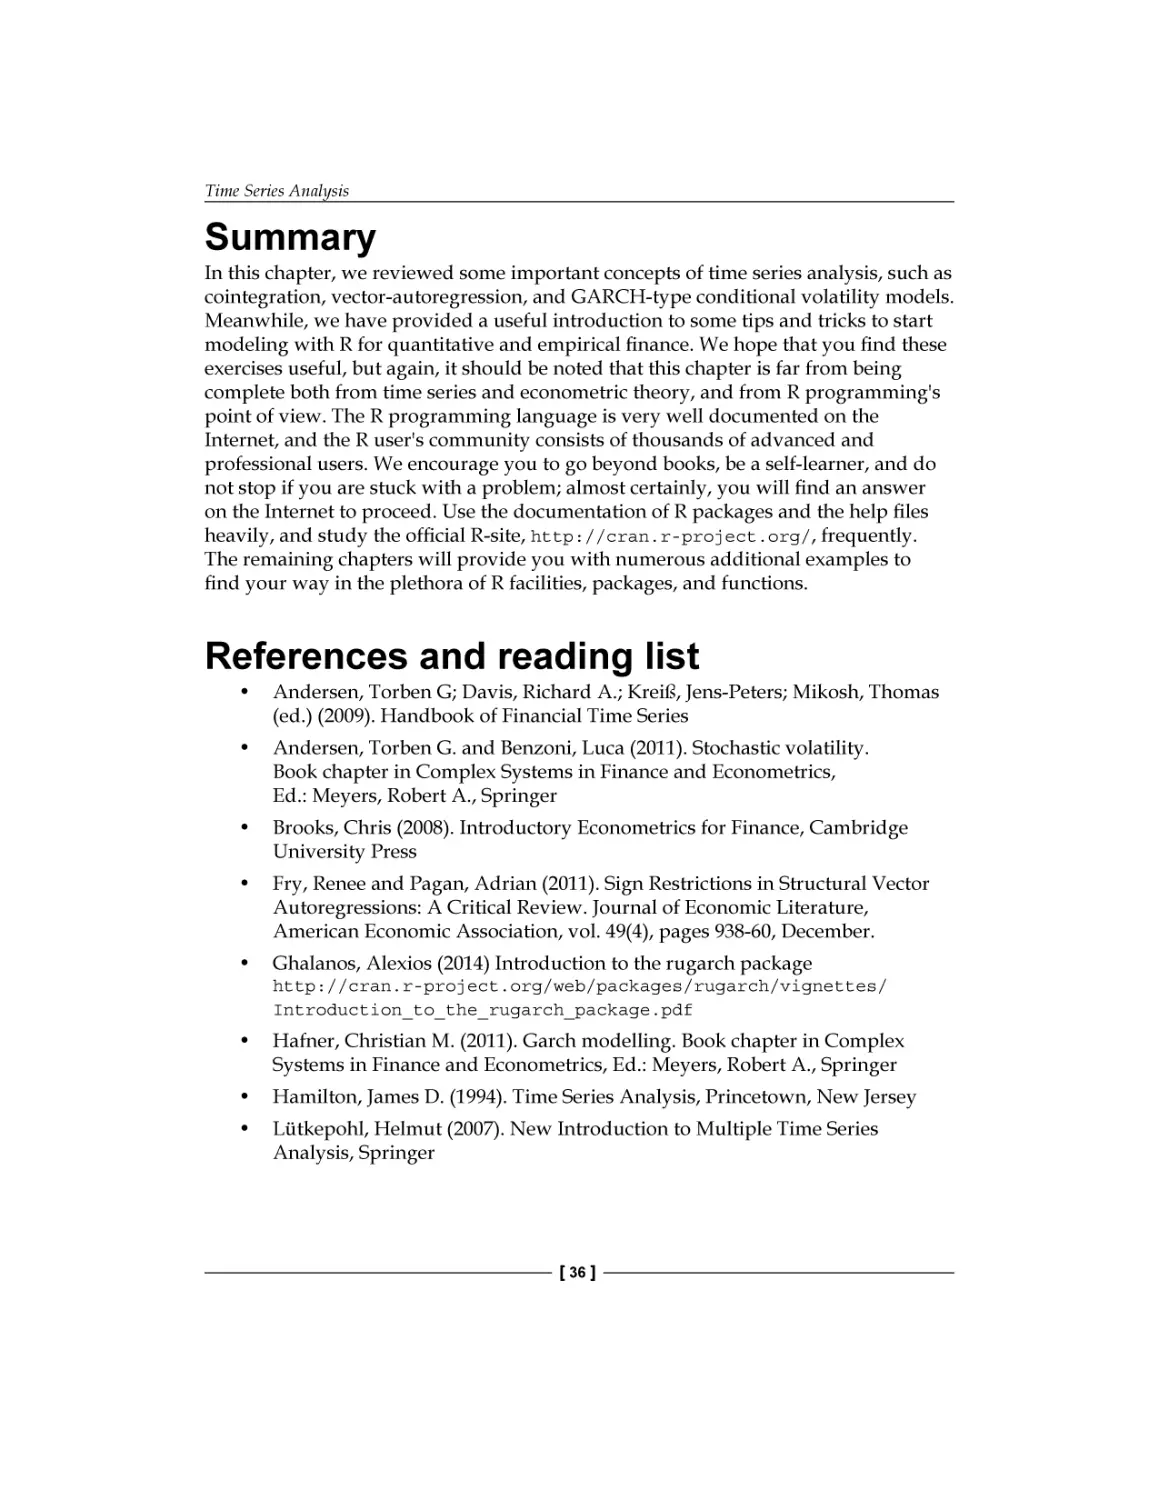 Summary
References and reading list